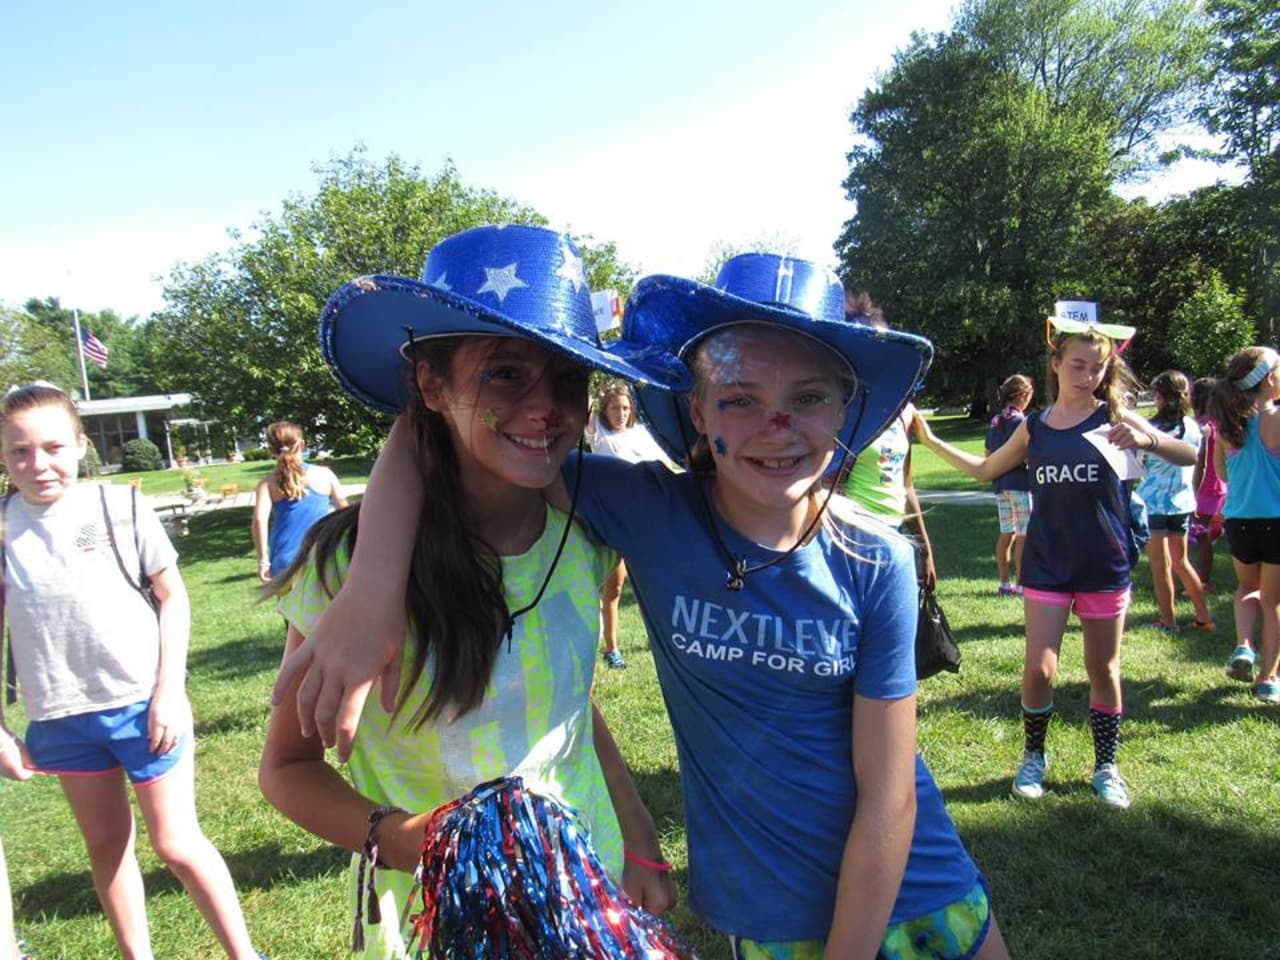 The Next Level Camp for Girls quickly became a popular destination for New Rochelle children. Boys will have the opportunity this summer in White Plains.